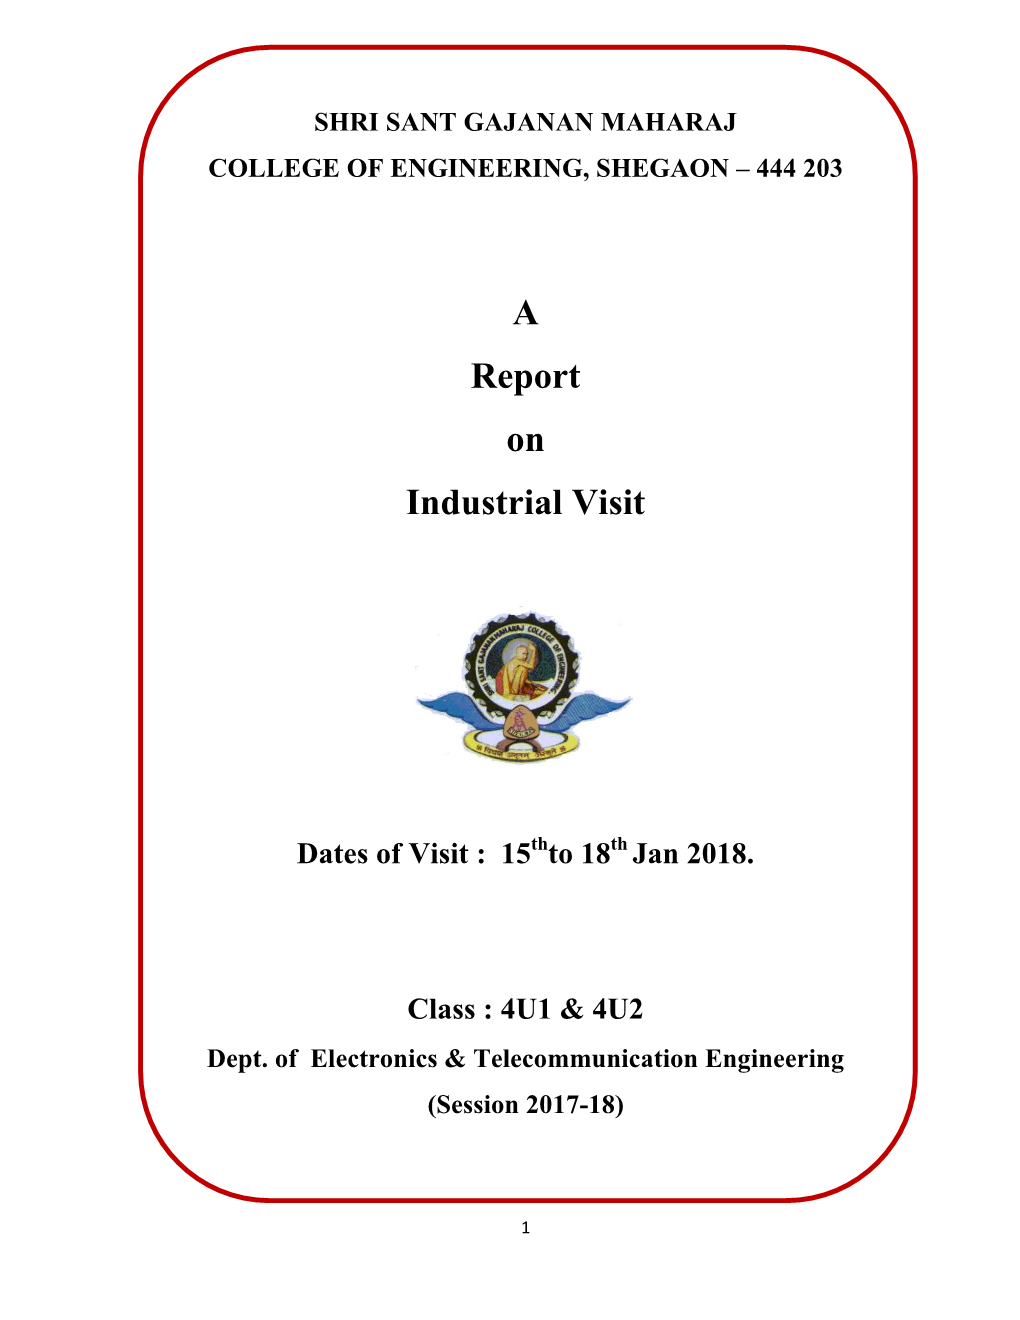 A Report on Industrial Visit